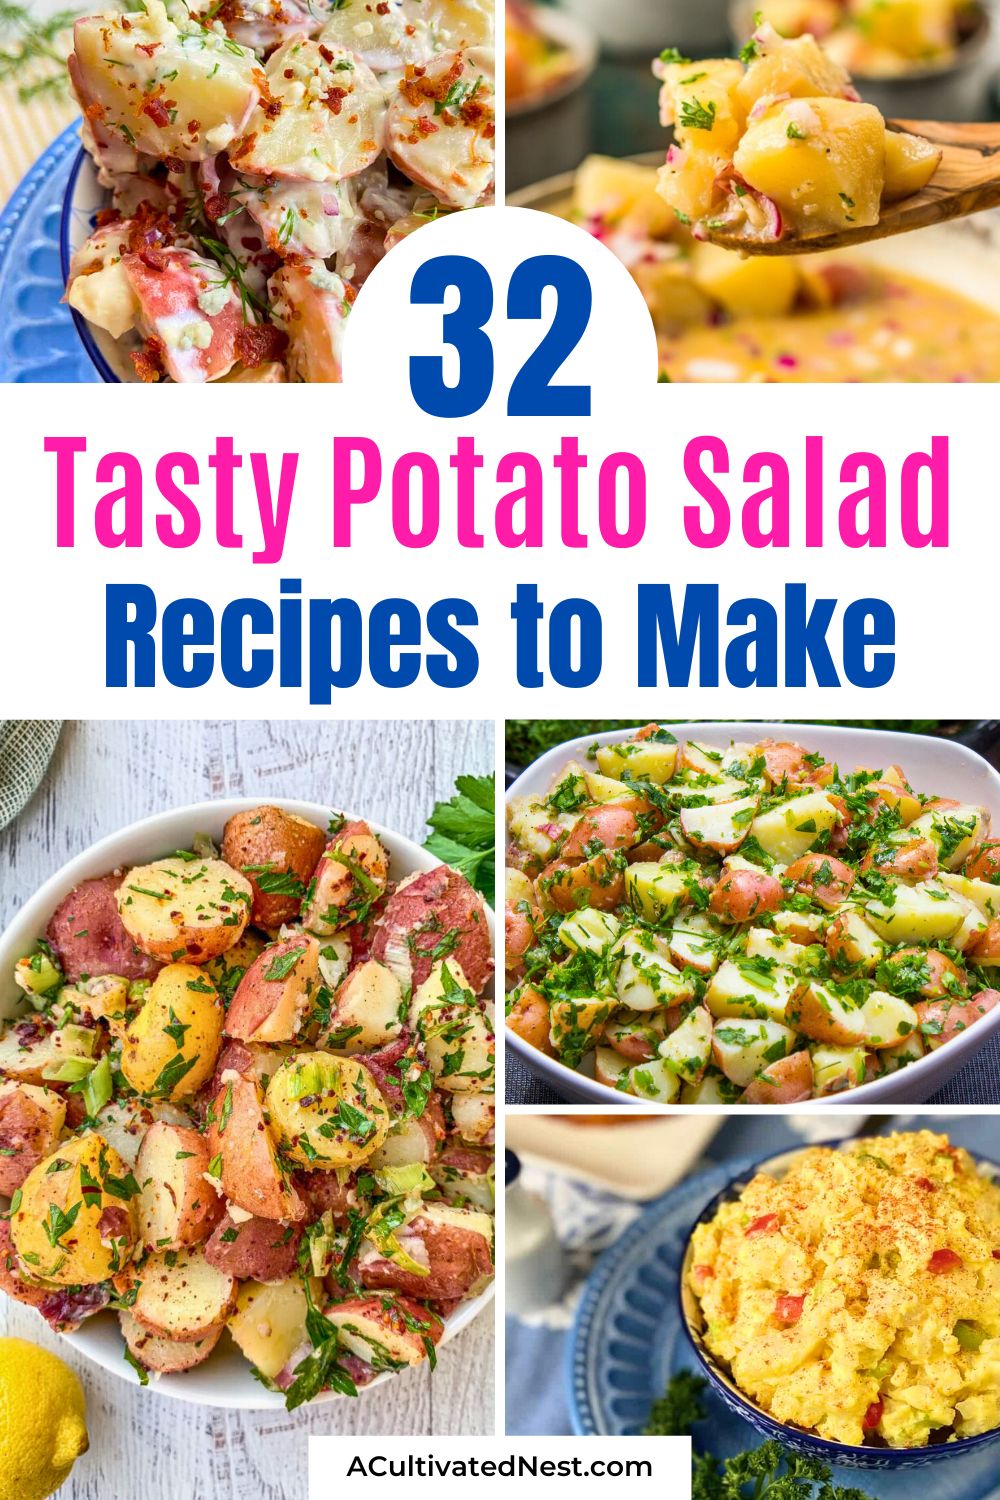 32 Tasty Potato Salad Recipes- Upgrade your side dish game with these delicious potato salad recipes! Whether you prefer creamy, tangy, or loaded with toppings, there's something for everyone. Perfect for barbecues, parties, and family dinners! | #PotatoSalad #bbqRecipes #recipeInspiration #recipeIdeas #ACultivatedNest